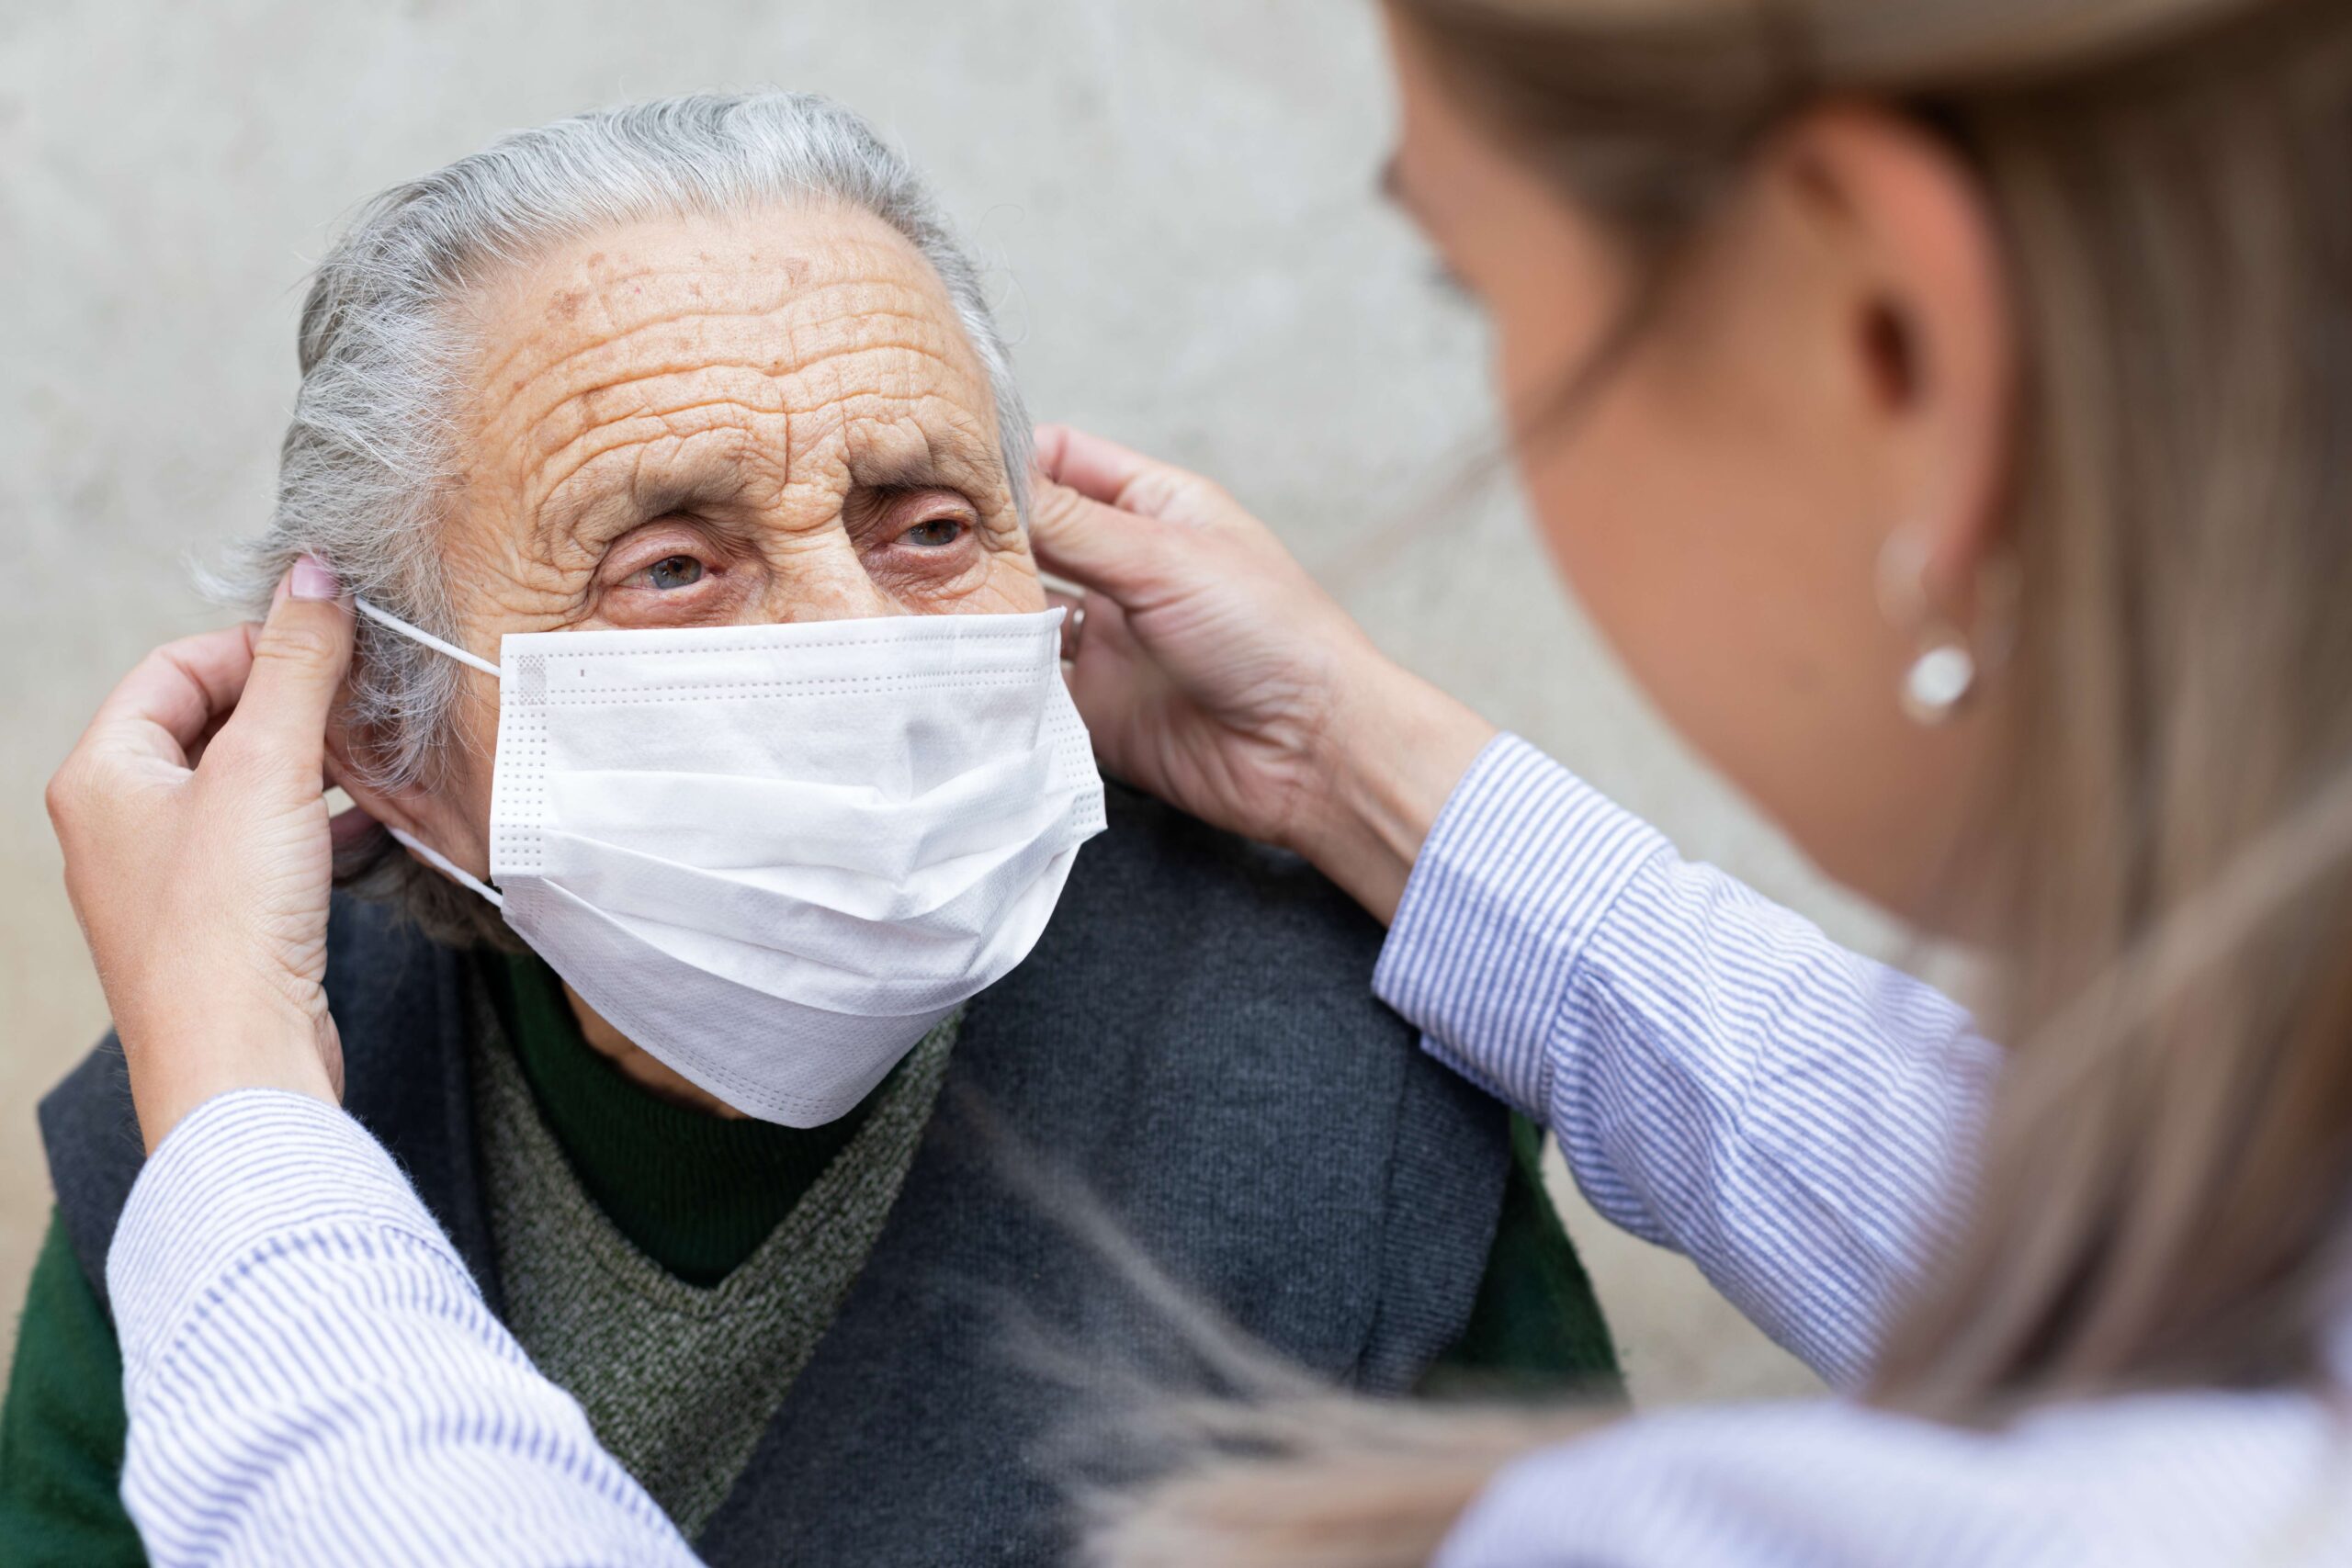 Is there a high risk for infection in nursing homes?